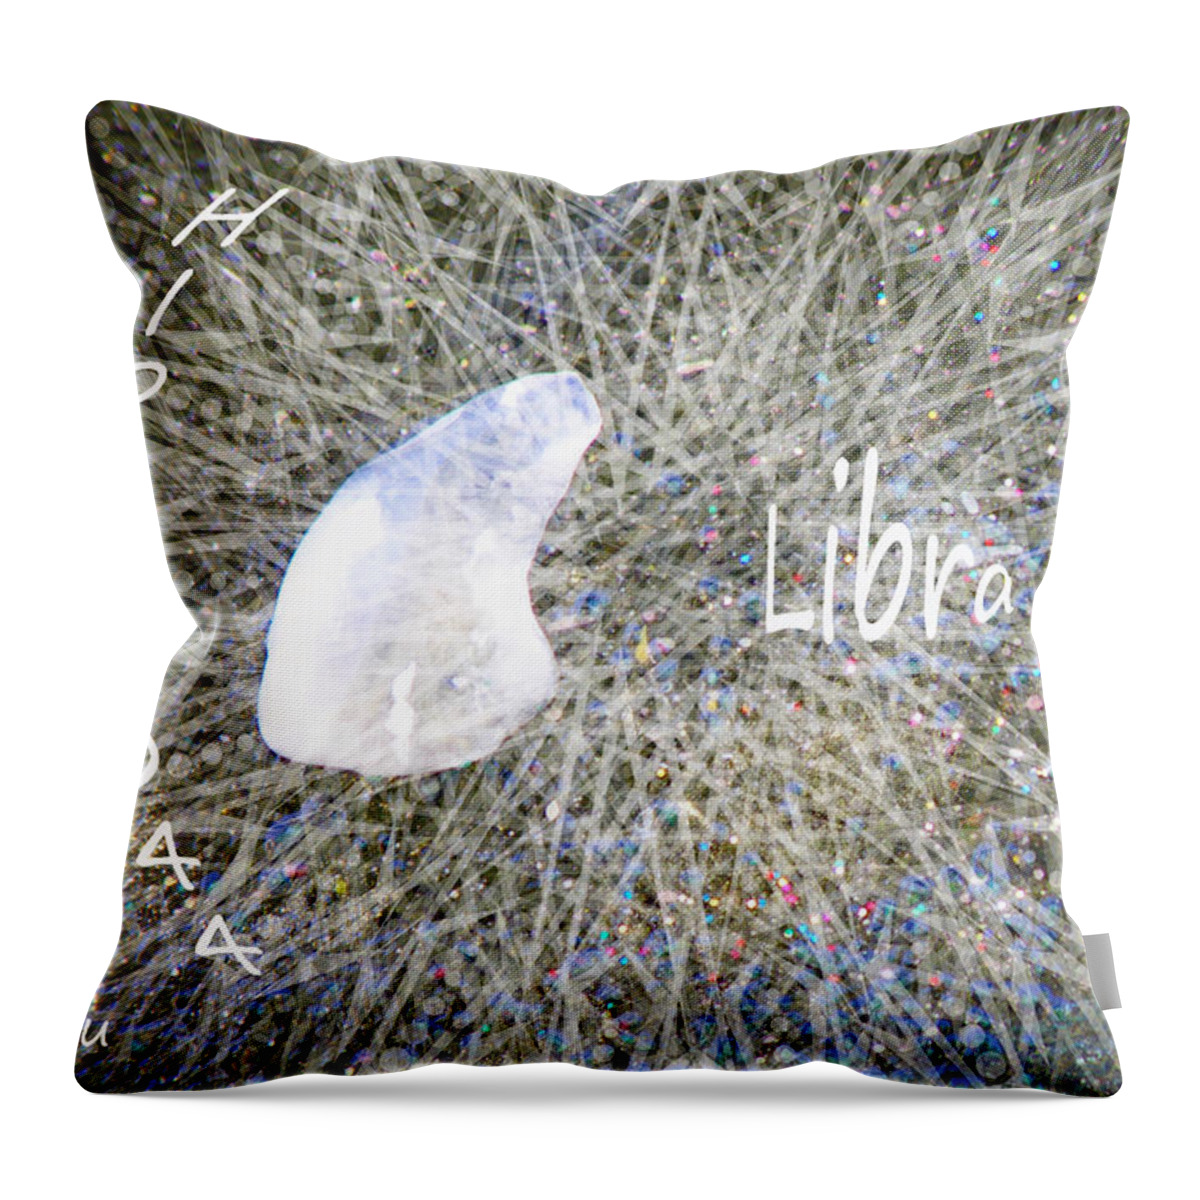 Barack Obama Throw Pillow featuring the photograph Star HIP 71044 by Augusta Stylianou